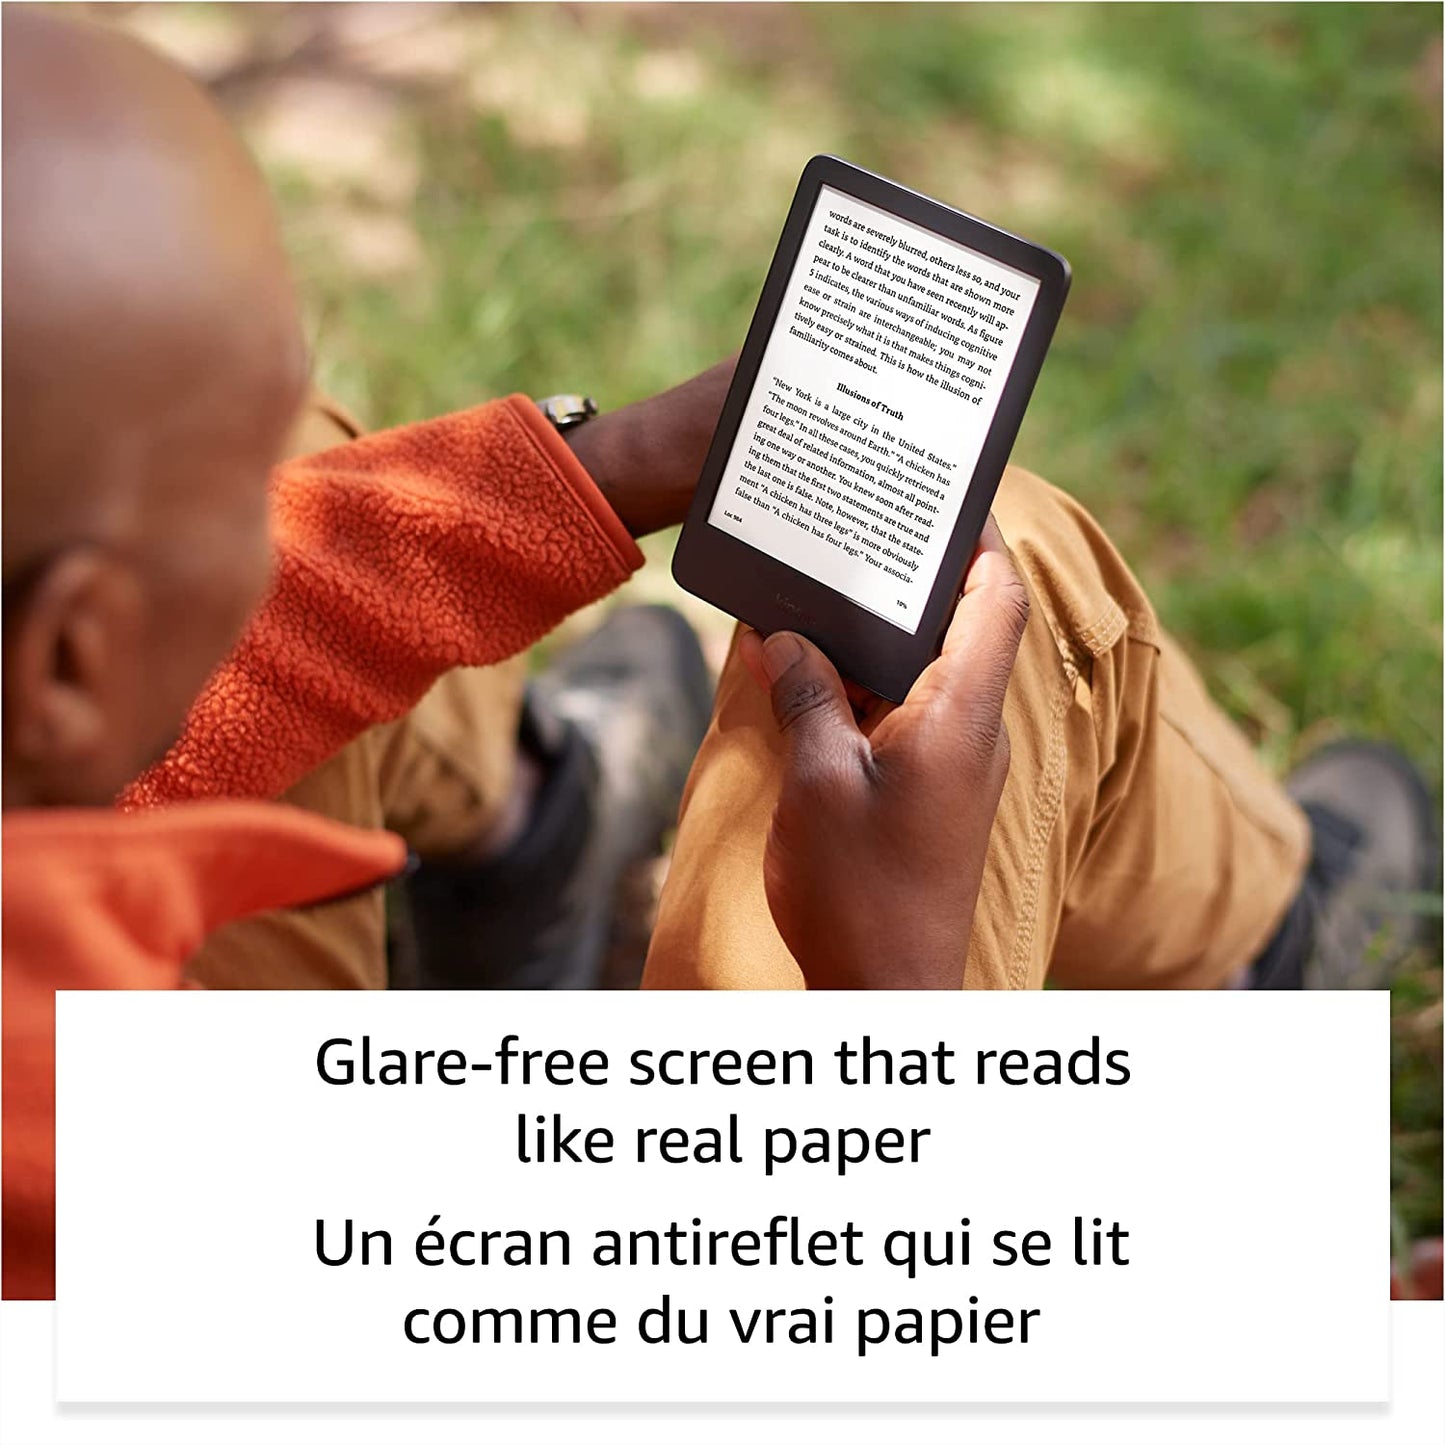 All-new Kindle (2022 release) – The lightest and most compact Kindle, now with a 6” 300 ppi high-resolution display, and 2x the storage